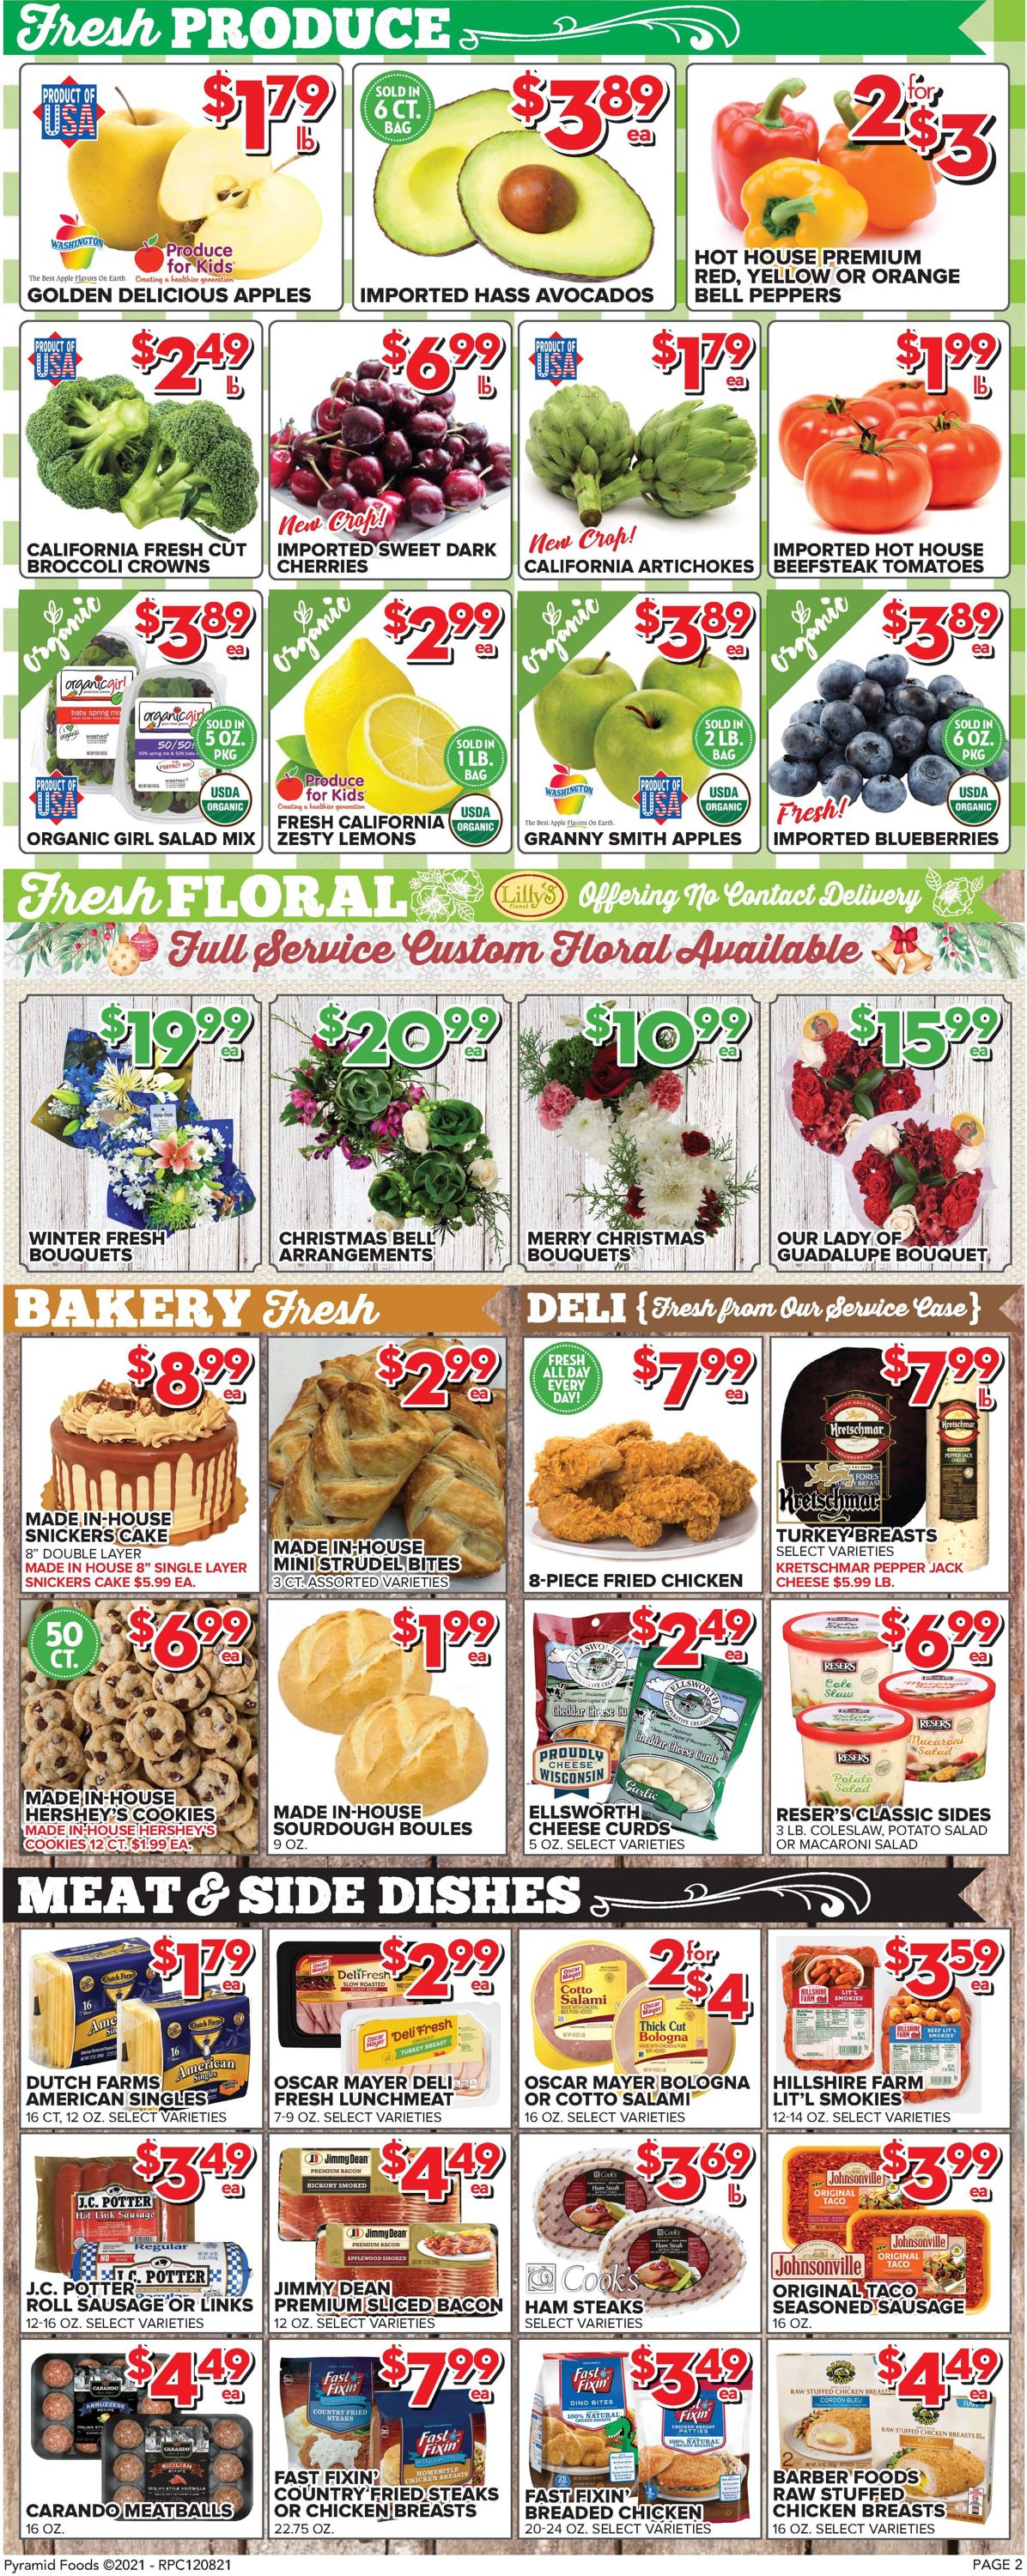 Price Cutter - HOLIDAY 2021 Weekly Ad Circular - valid 12/08-12/14/2021 (Page 2)